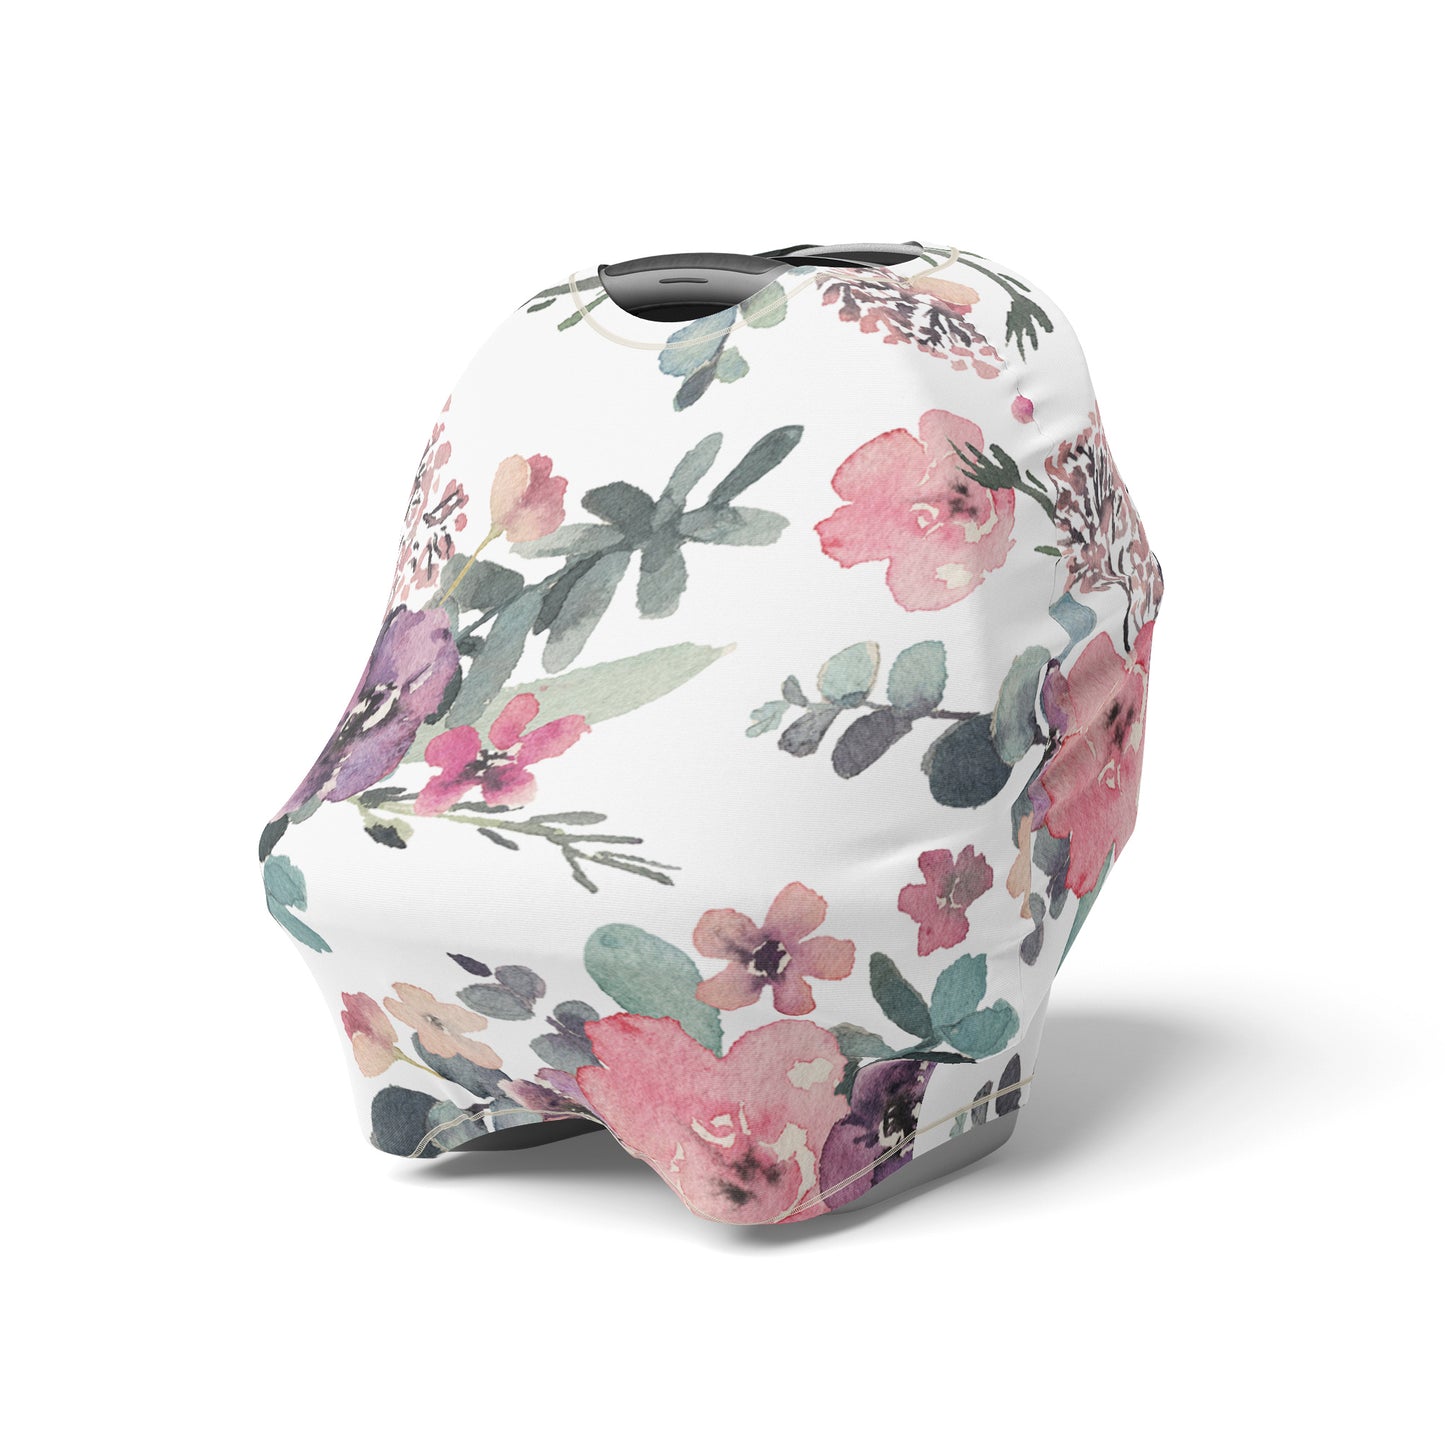 Floral Car Seat Cover, Baby Girl Nursing Cover - Wild Pink